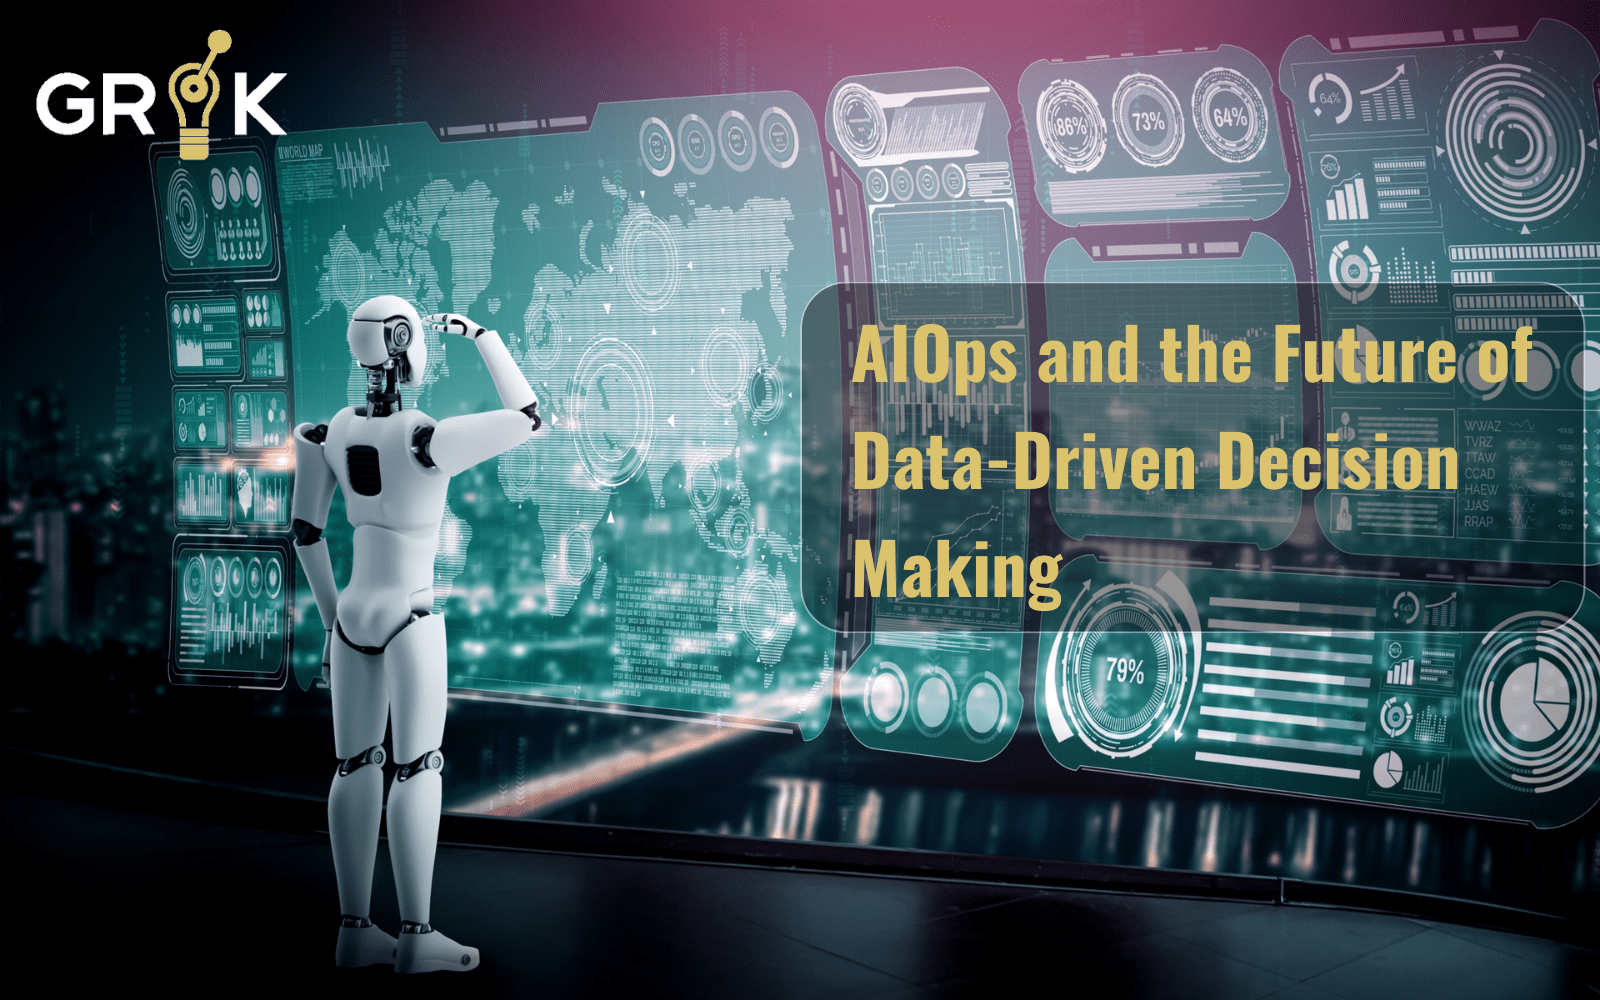 Humanoid robot engaging with an advanced analytics dashboard, epitomizing the impact of AIOps on strategic business intelligence and data-driven decision-making.